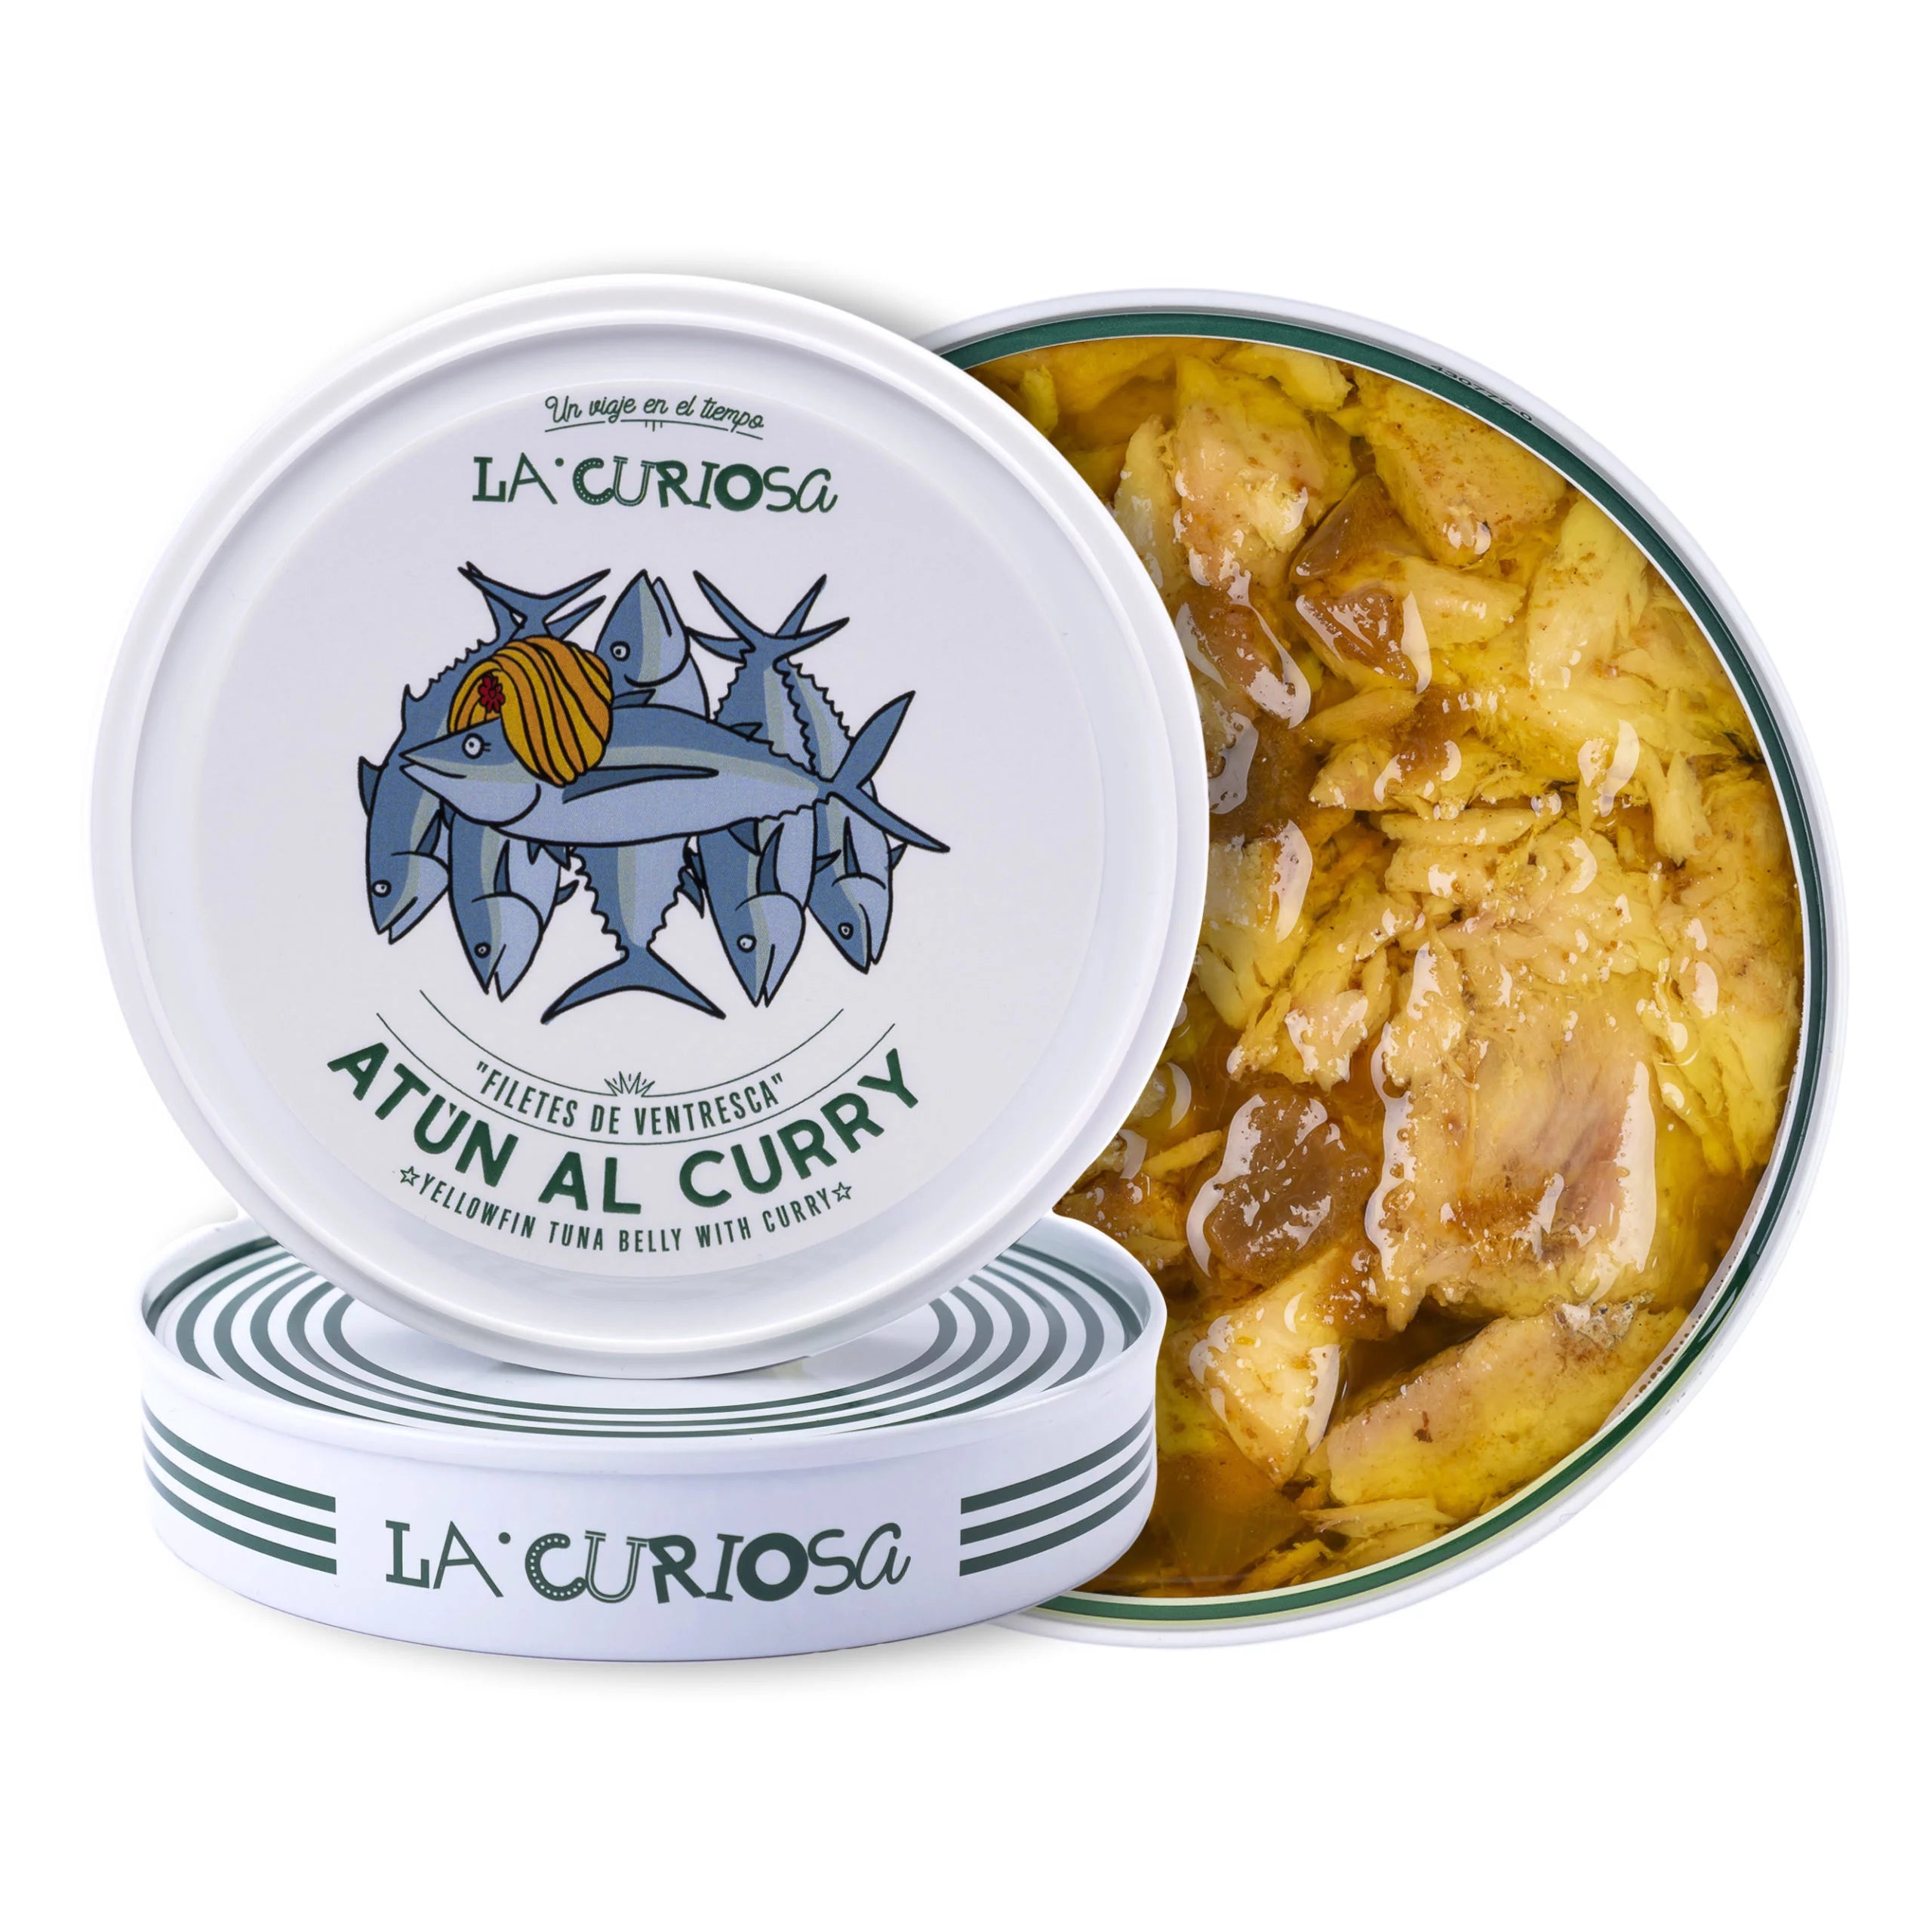 La Curiosa Tuna Belly Fillets with Curry